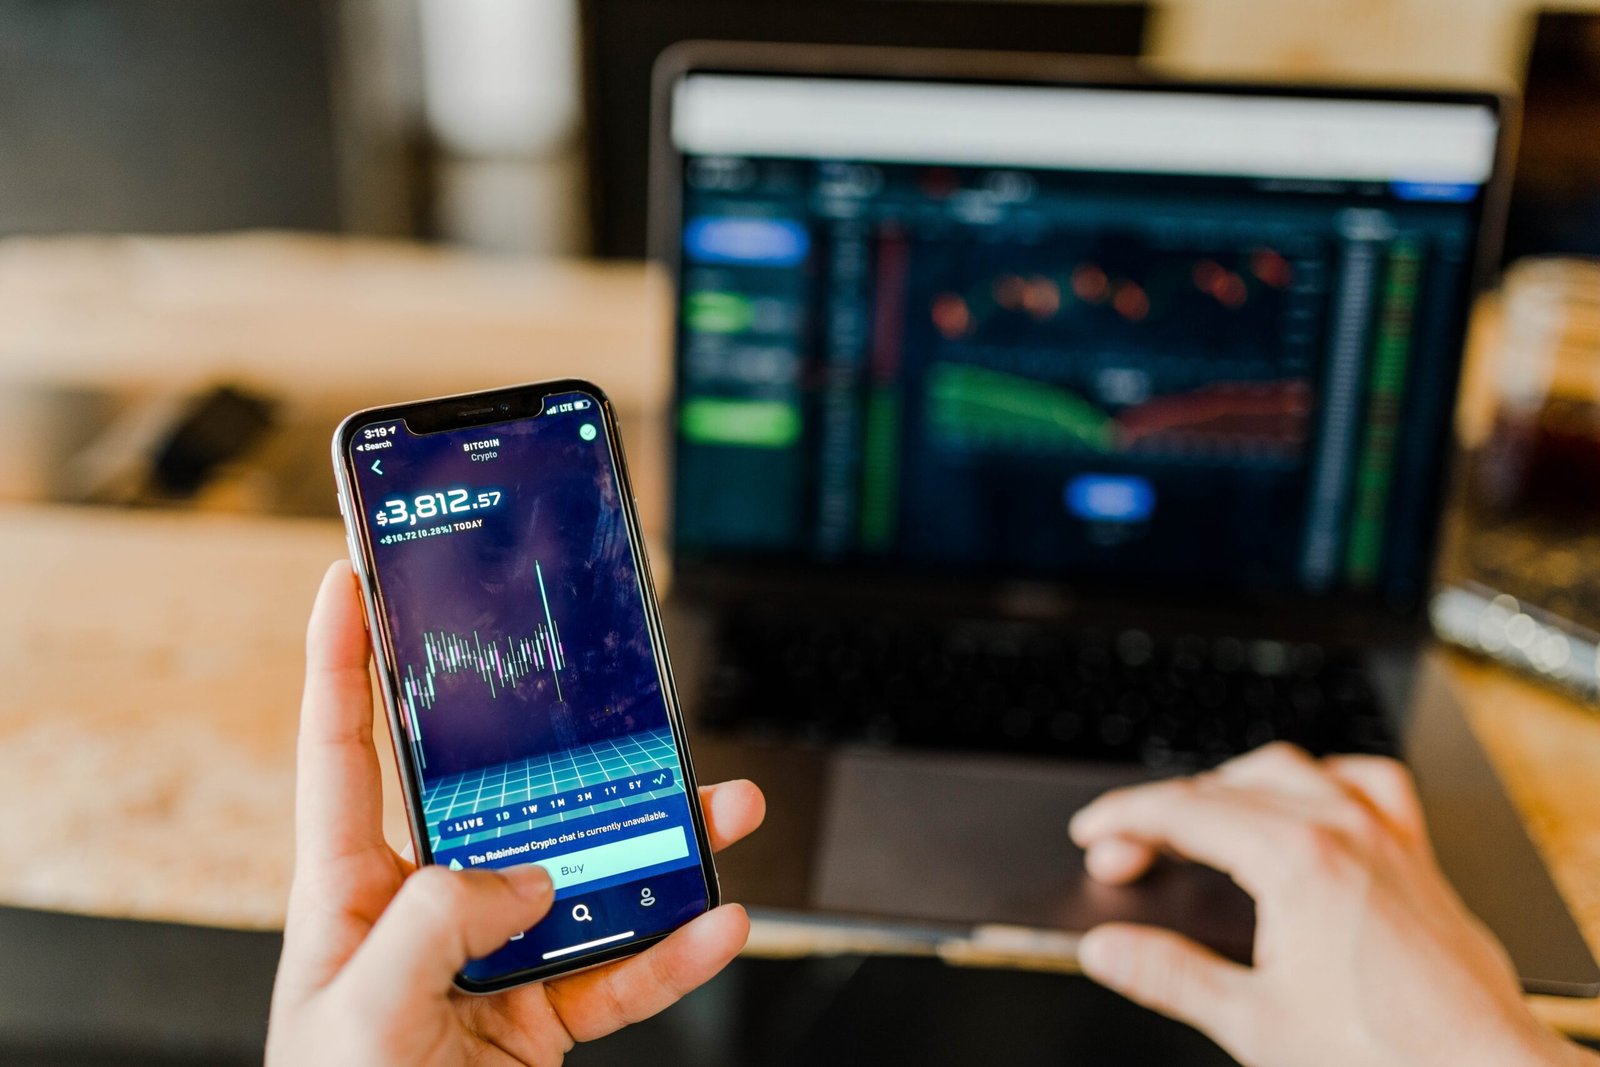 Day Trading vs. Spread Betting: Which is the Better Option?